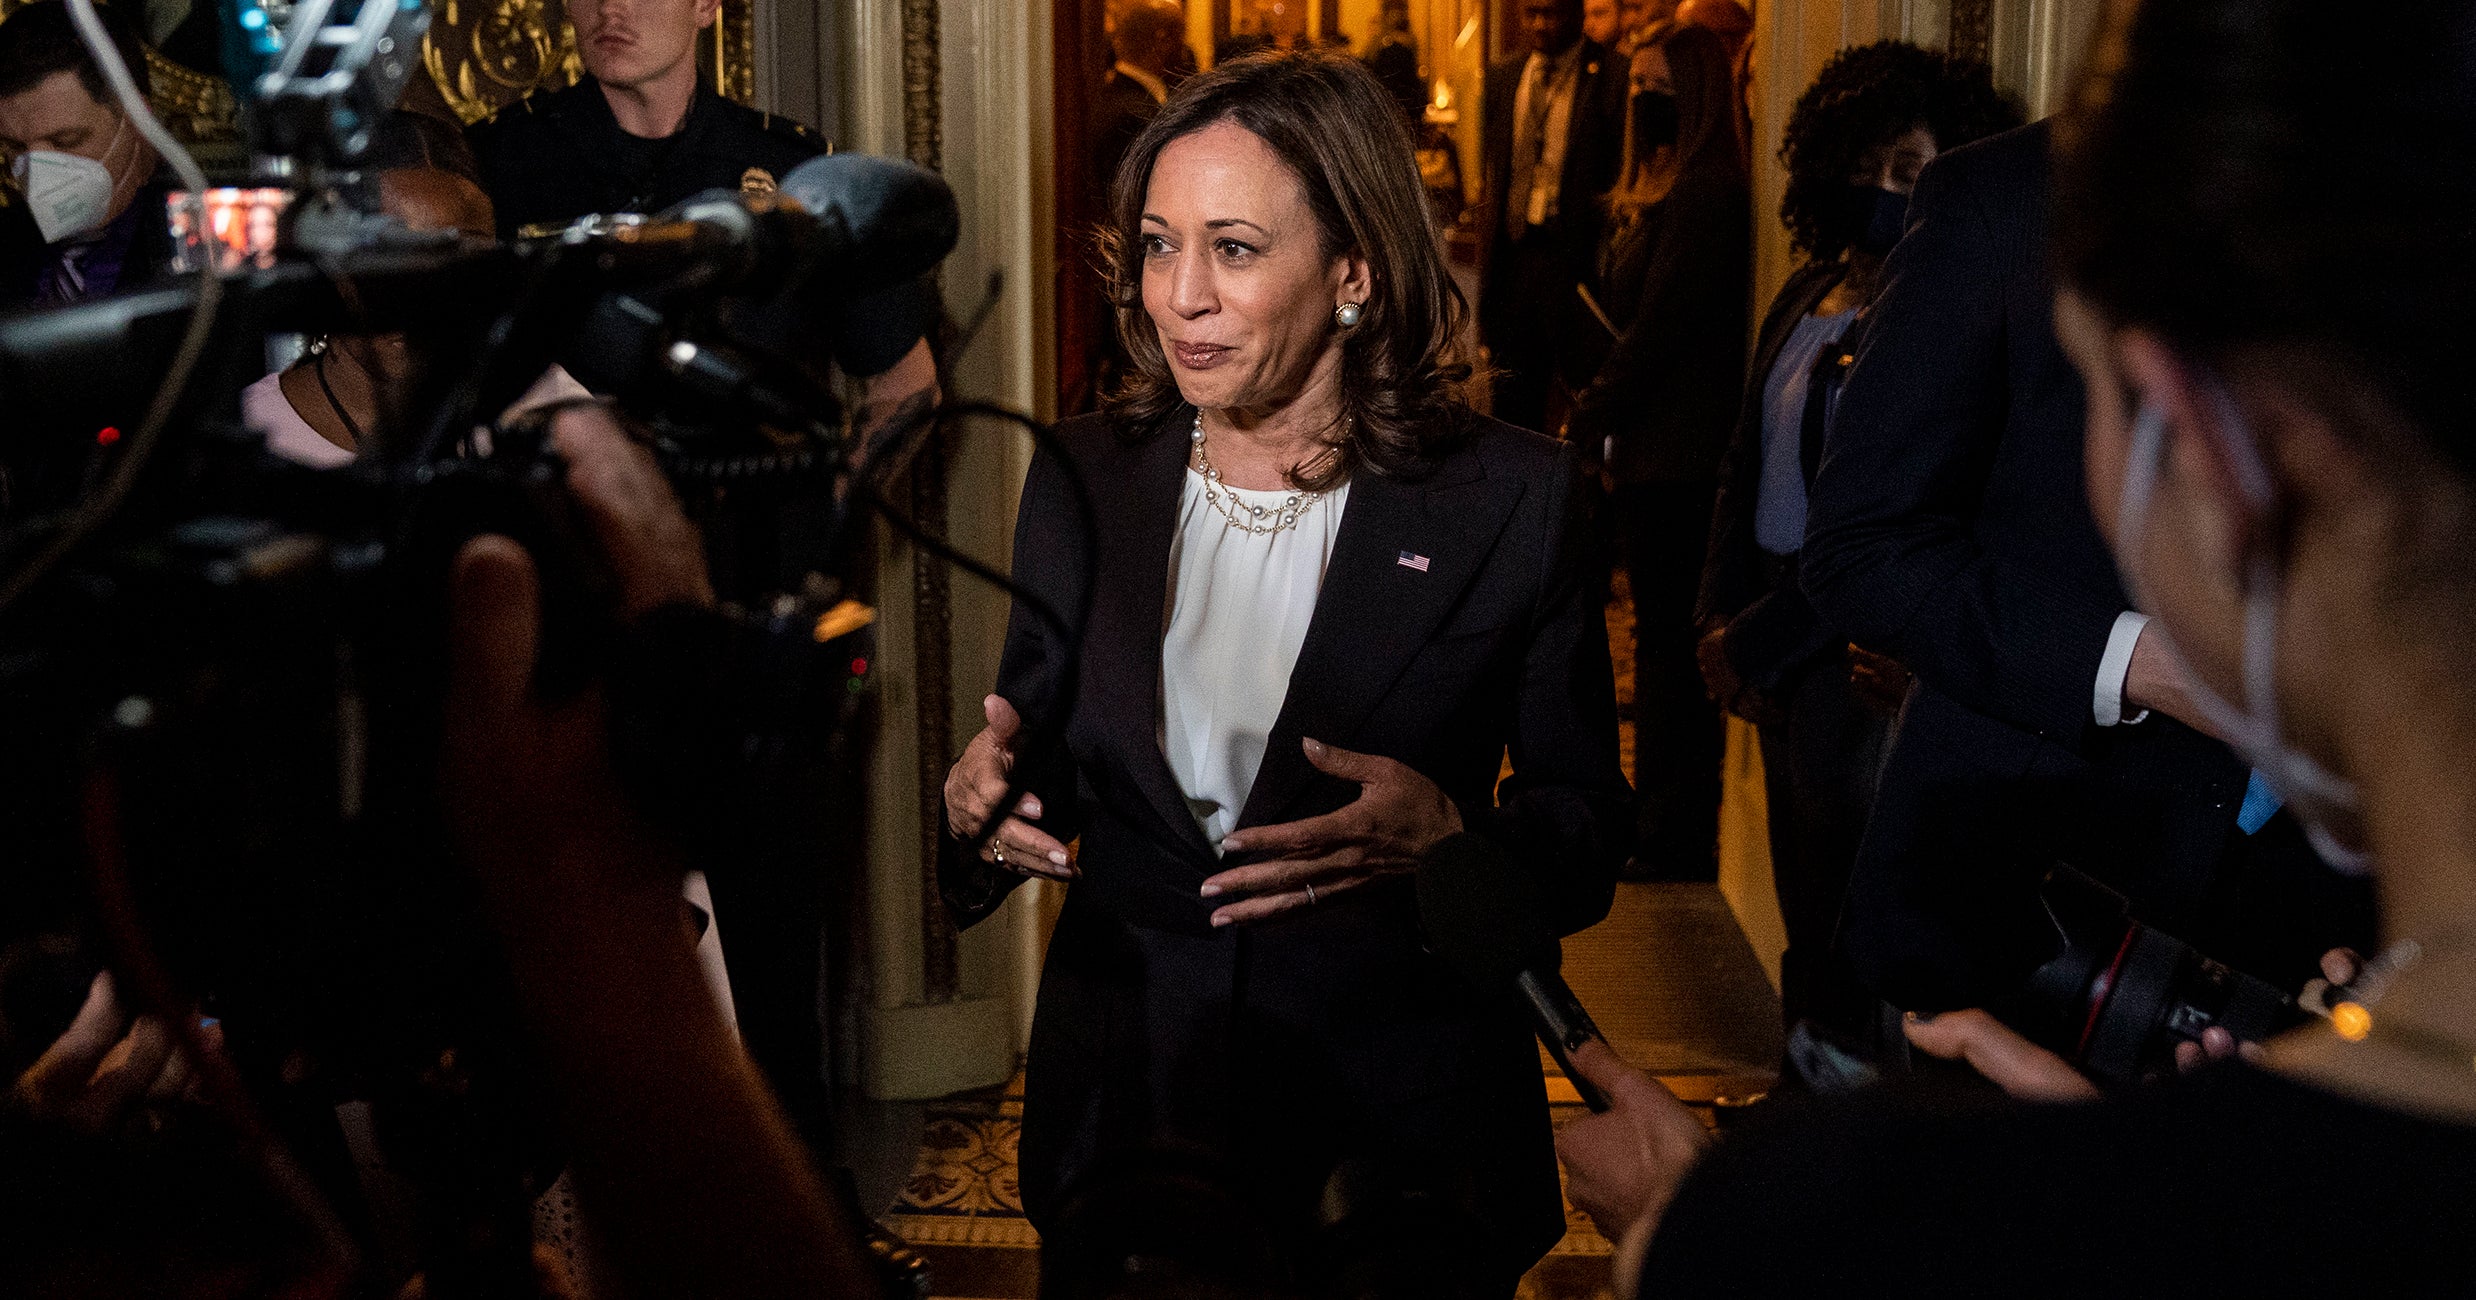 Kamala Harris On Forcing People To Stay Pregnant: “Women Are Dying”